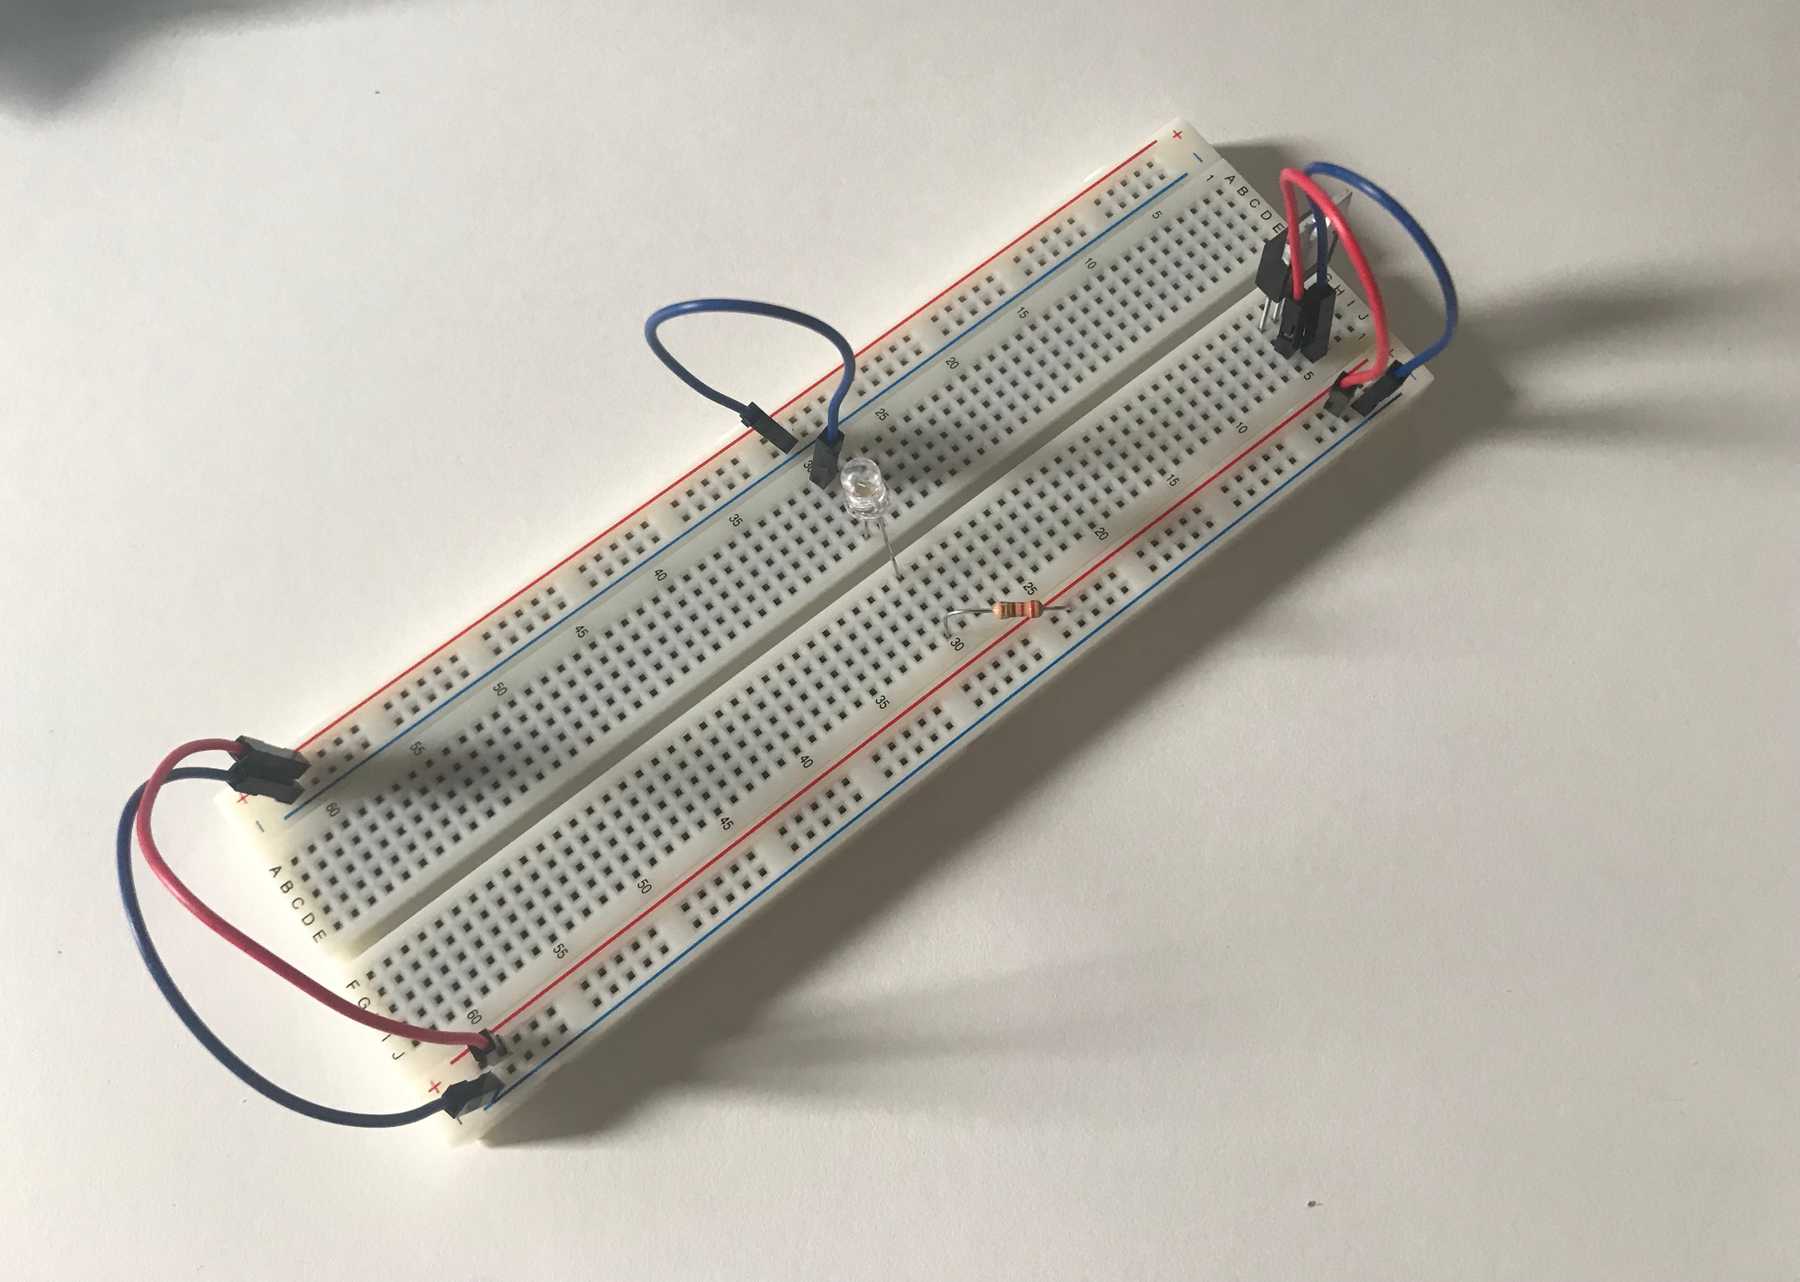 Breadboard with a resistor and LED in series connecting Vin to Ground